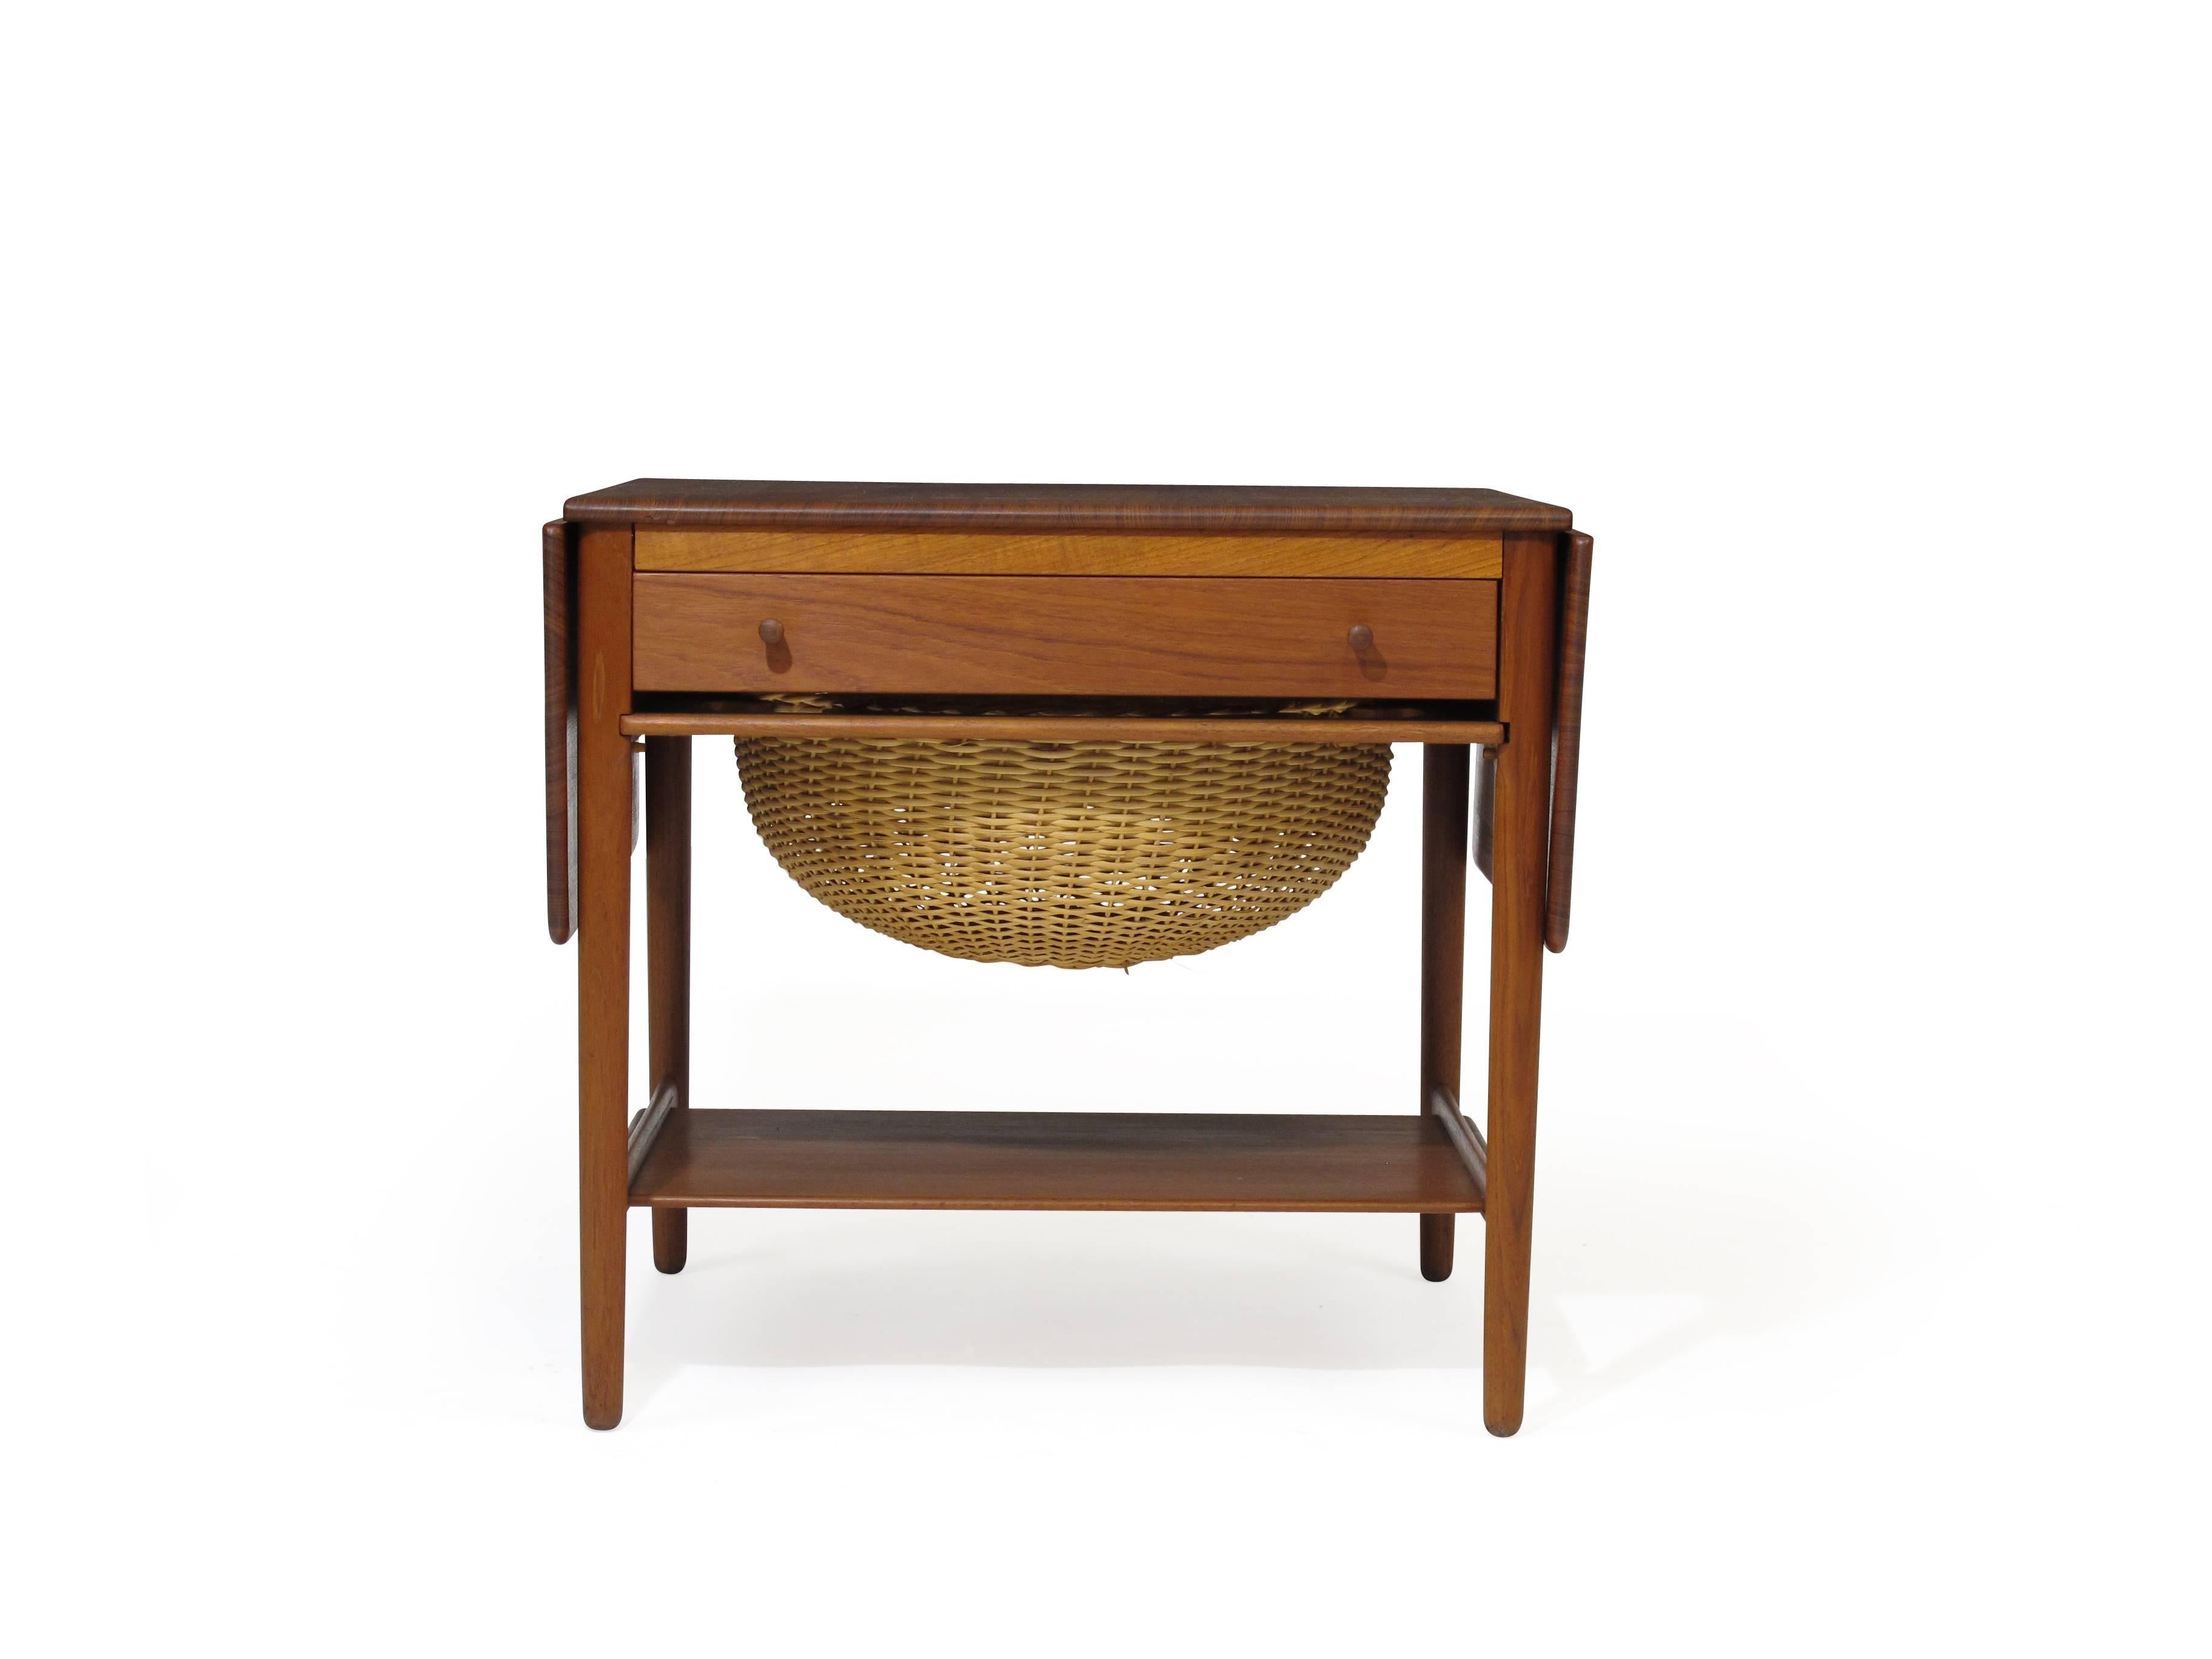 Mid-Century solid teak side table designed by Hans Wegner for Andreas Tuck, Model AT-33. Solid teak with two drop leaves, drawer on front and woven basket under for more storage.